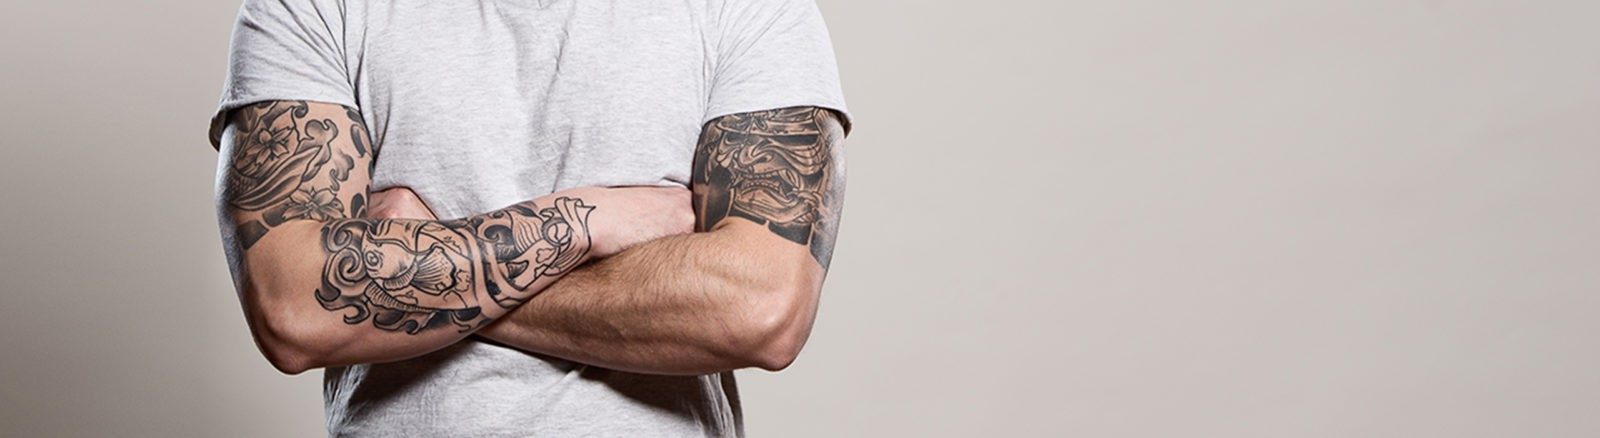 Tattoo Removal Services  Body Details [video]